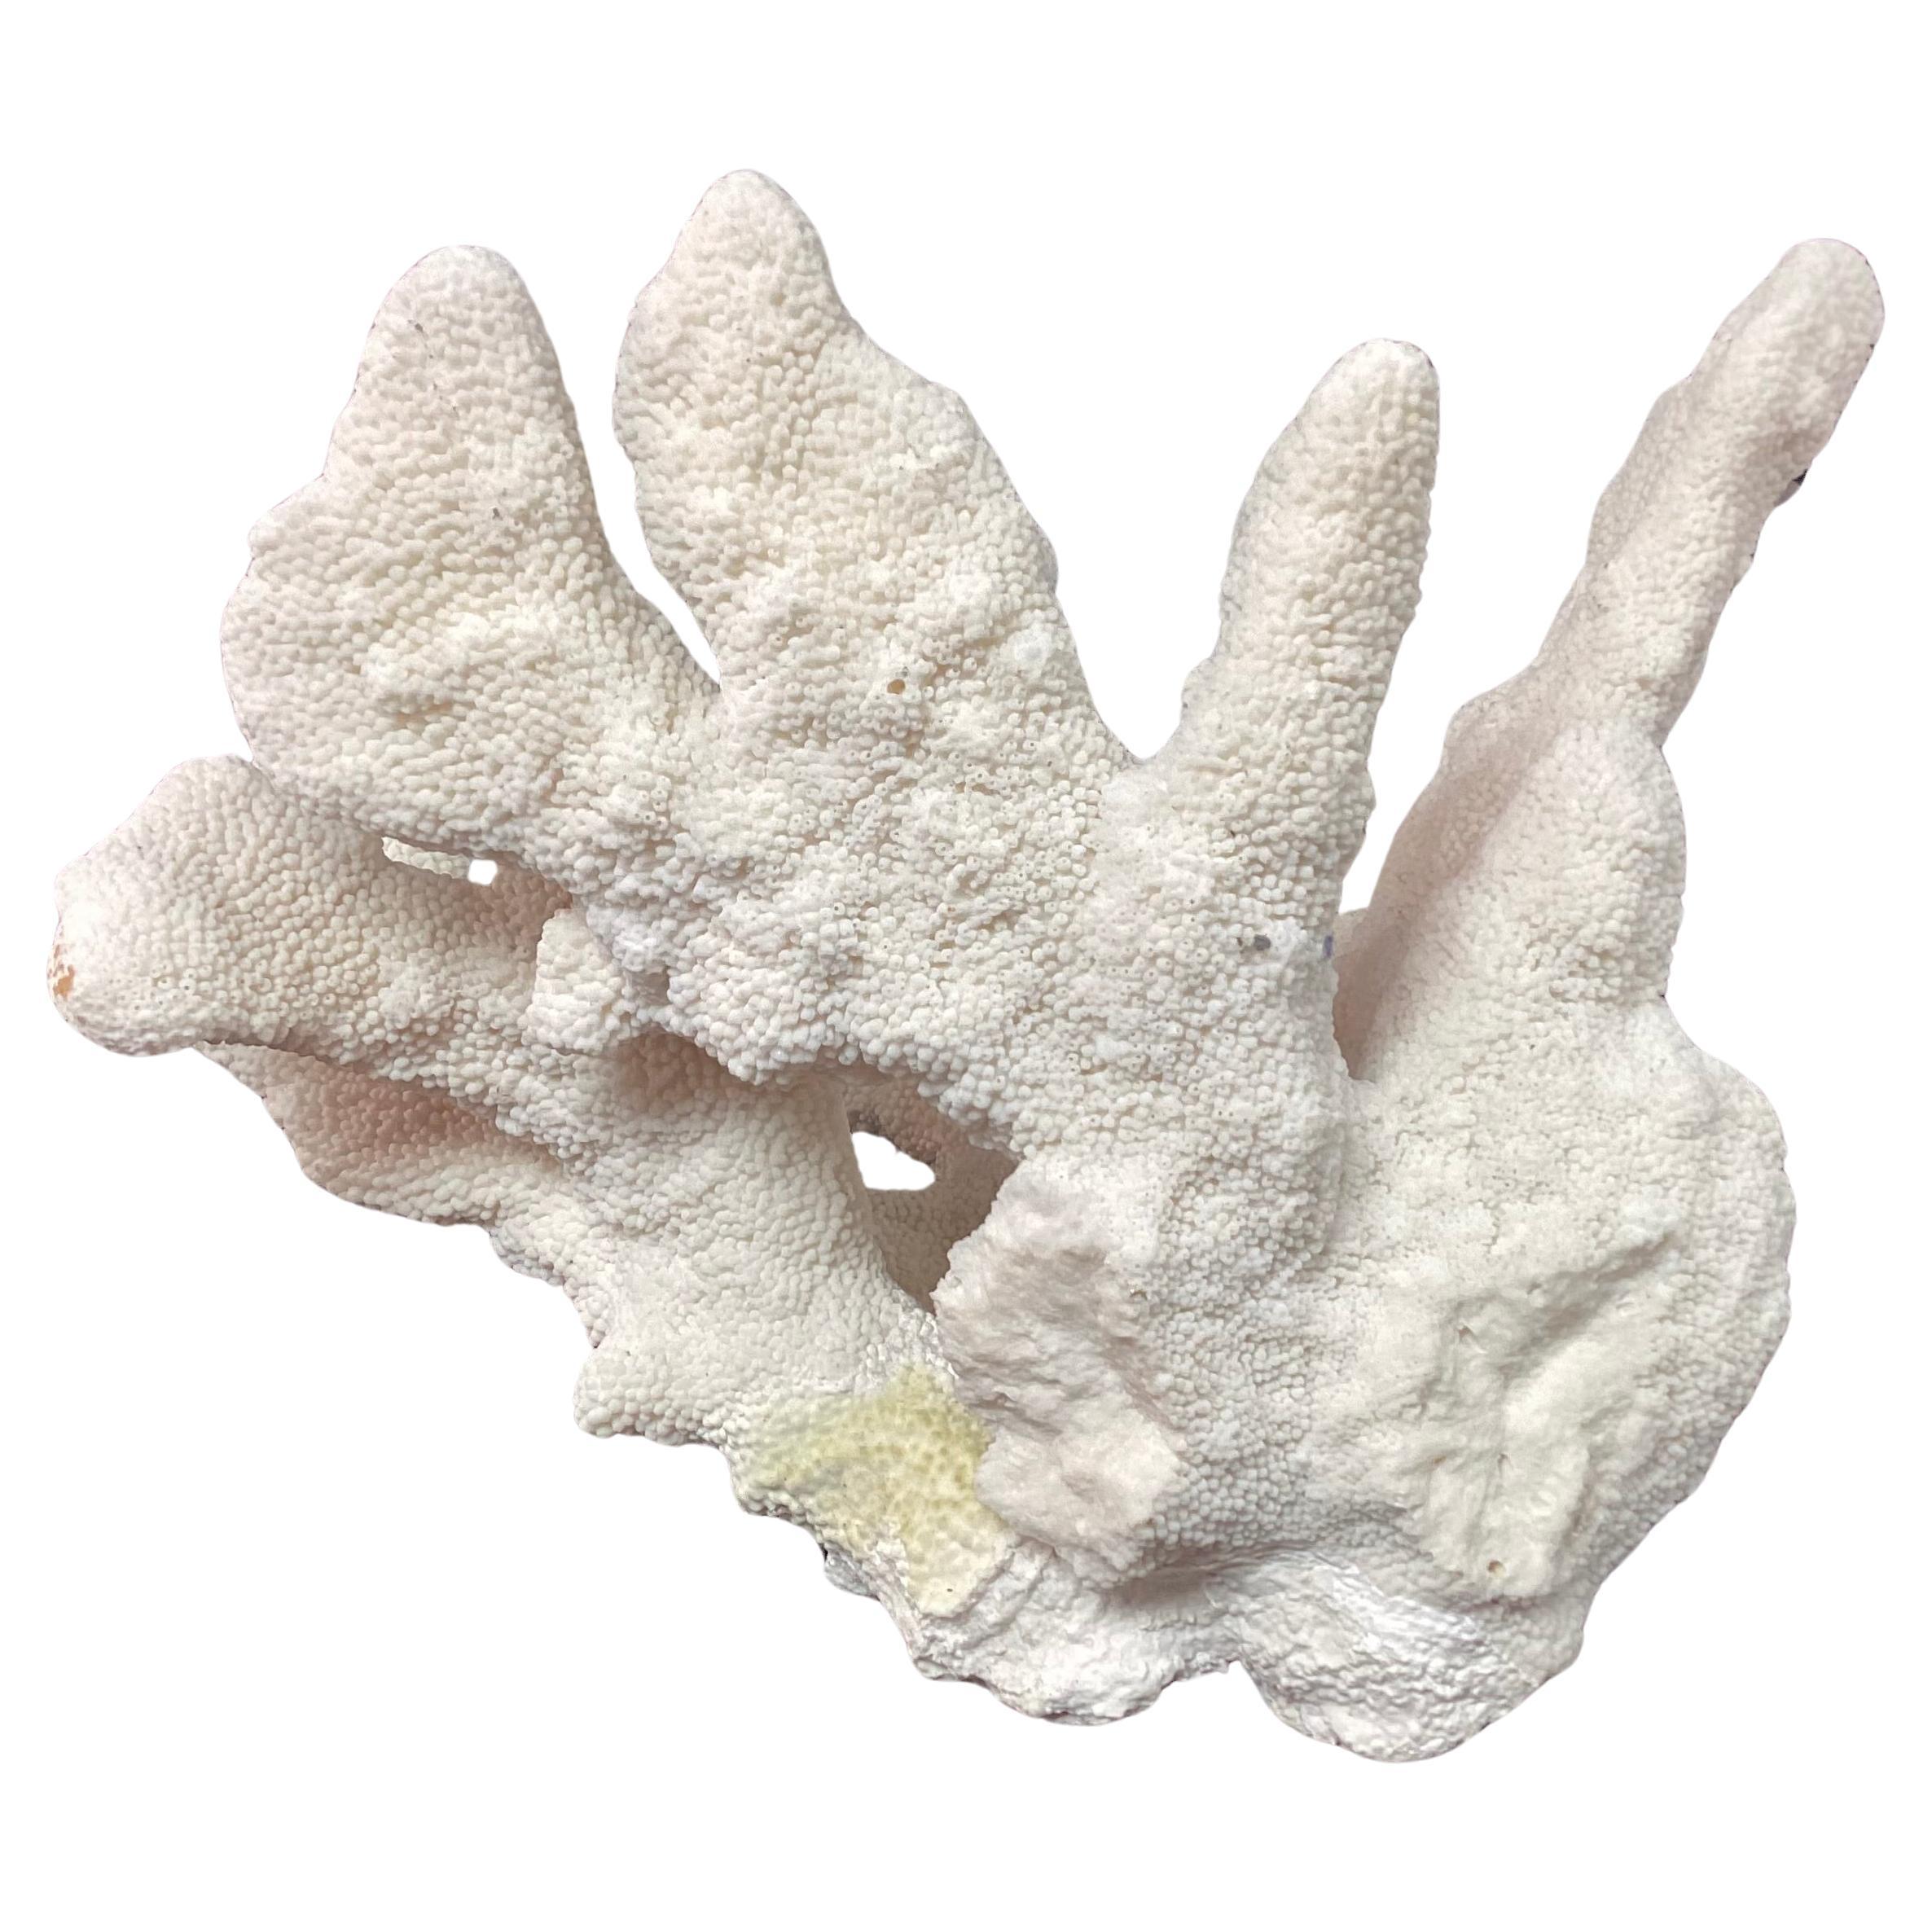 Large Natural White Coral Reef Specimen #4 In Good Condition For Sale In Bradenton, FL